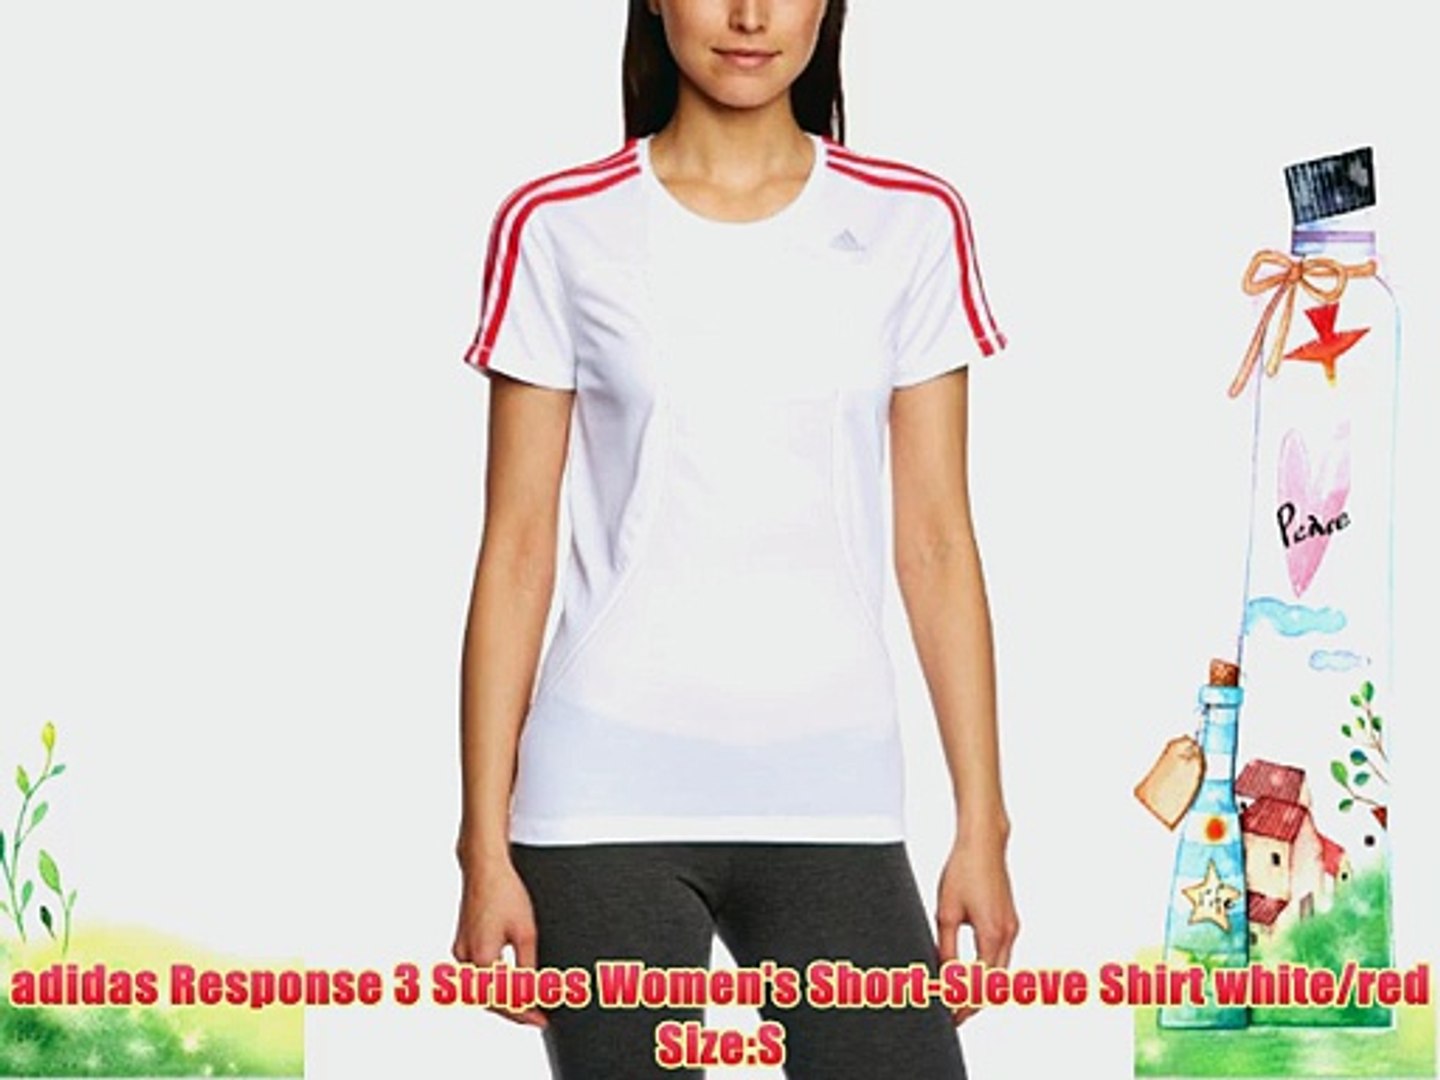 white adidas shirt with red stripes